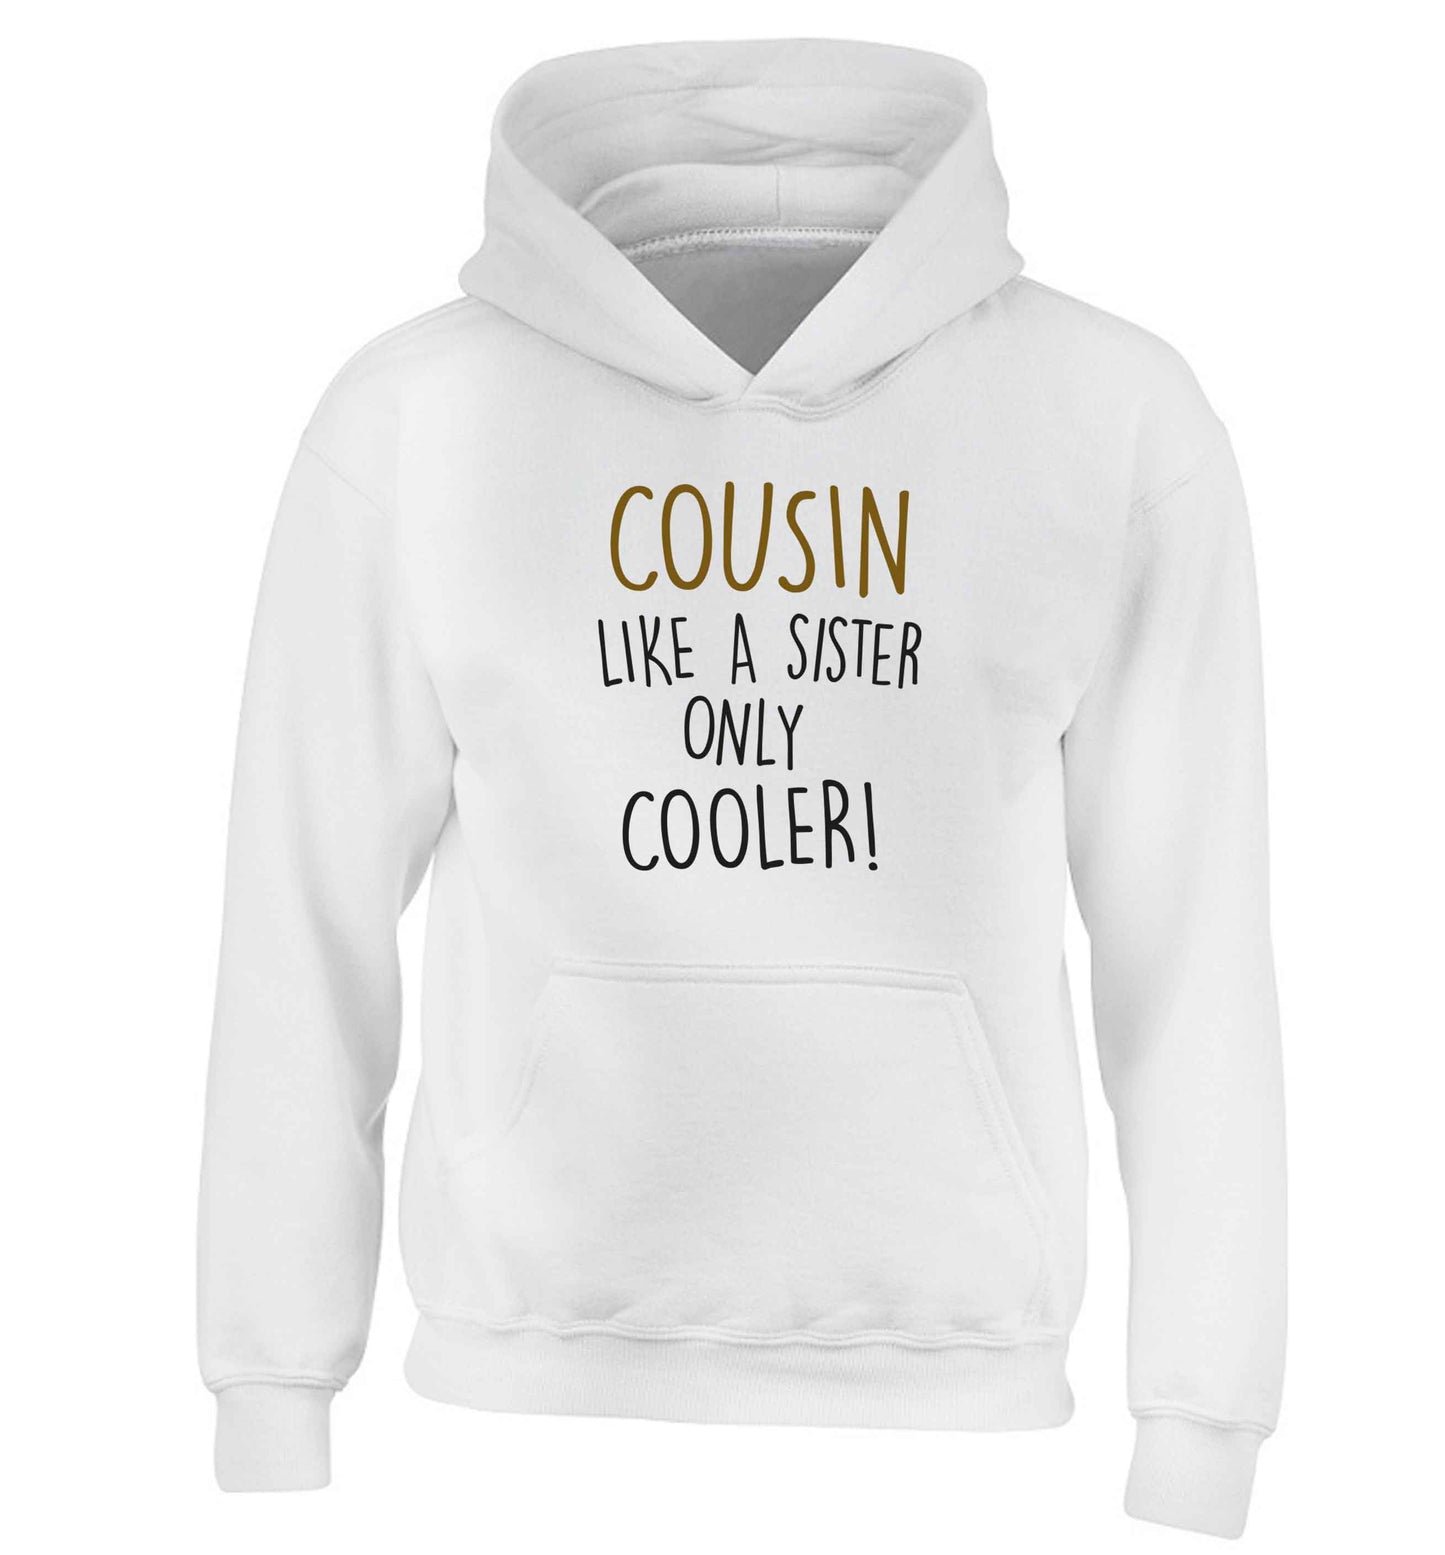 Cousin like a sister only cooler children's white hoodie 12-13 Years